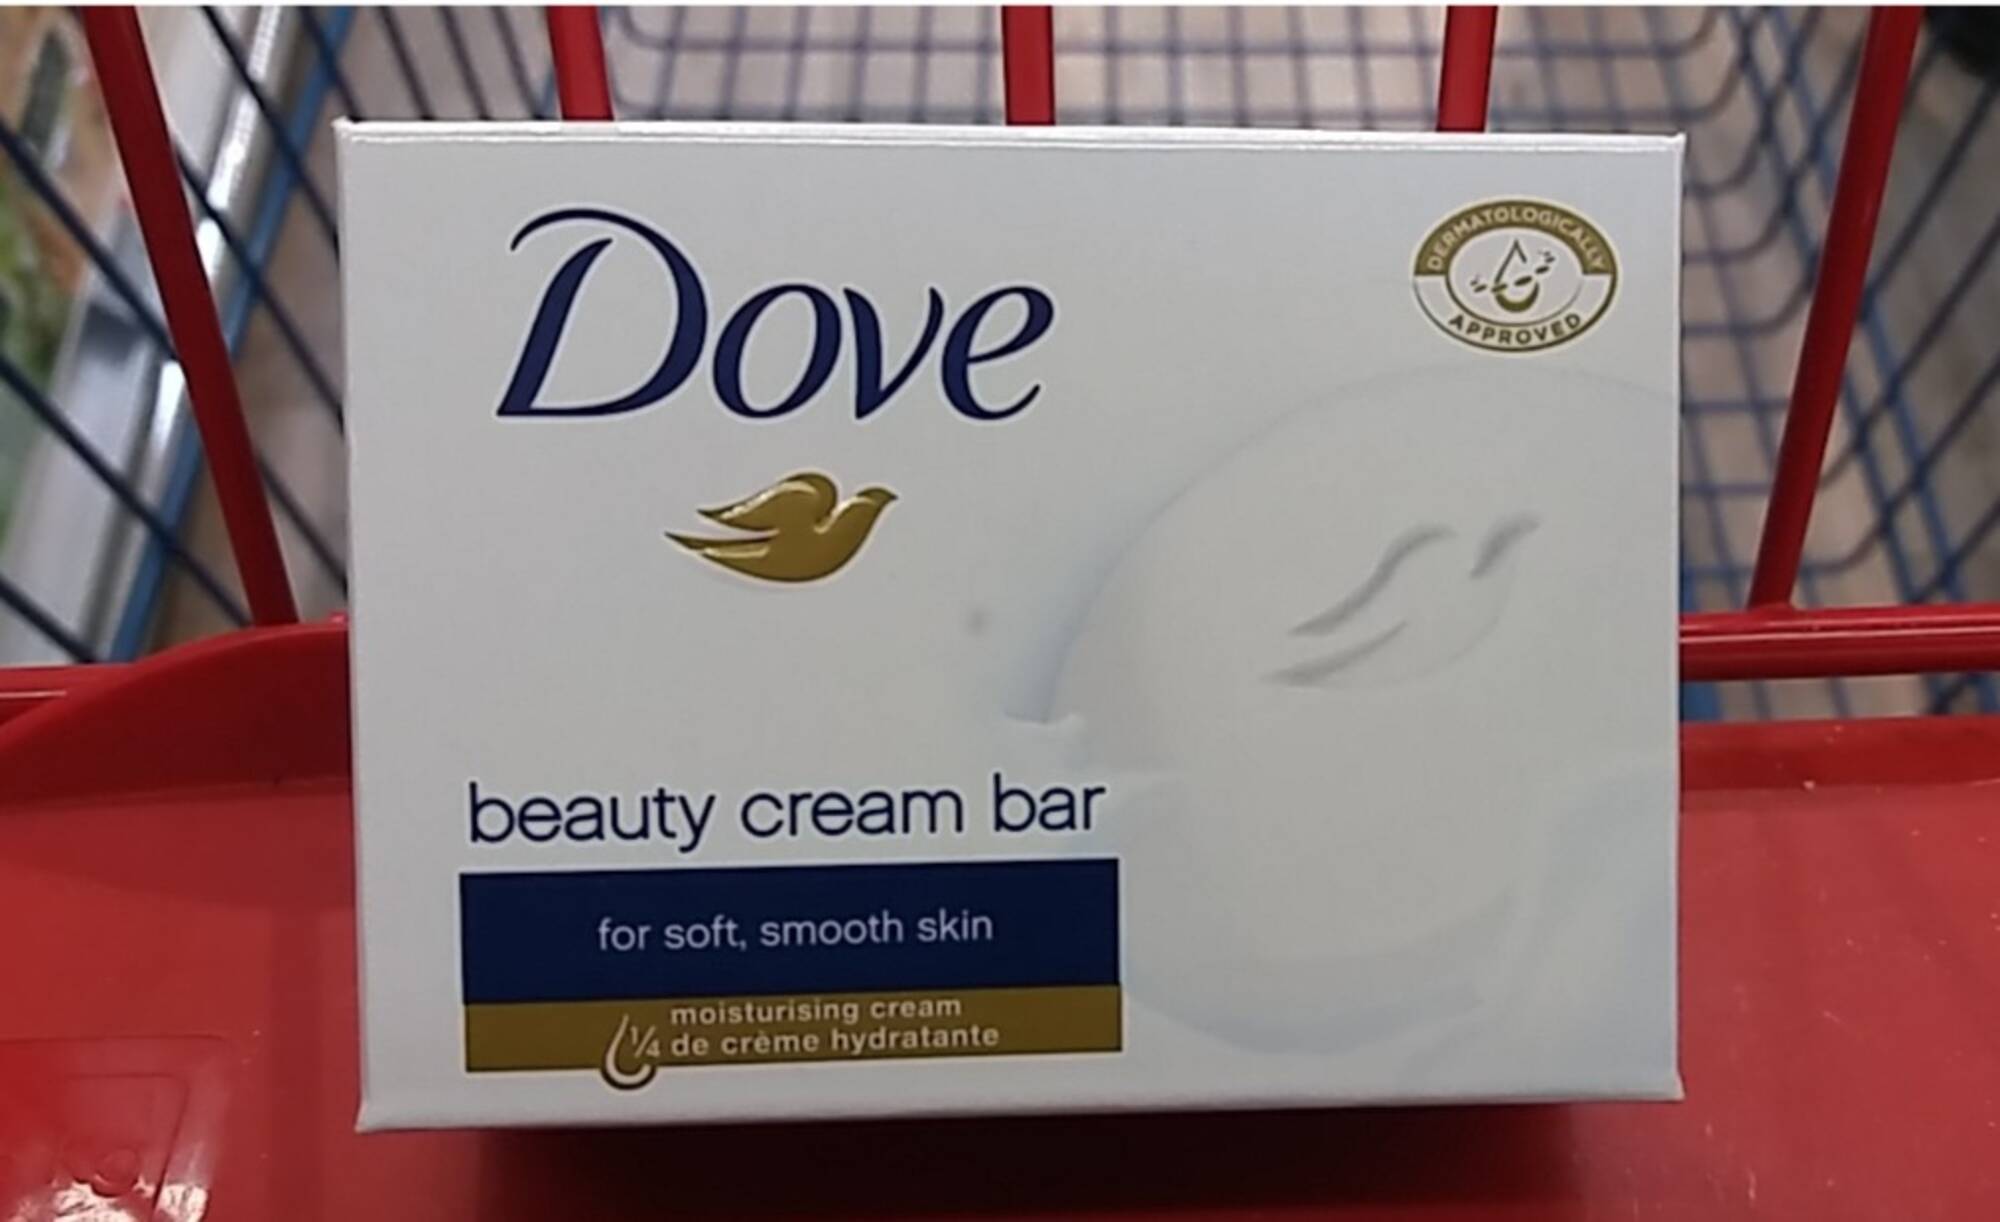 DOVE - Beauty cream bar for soft, smooth skin